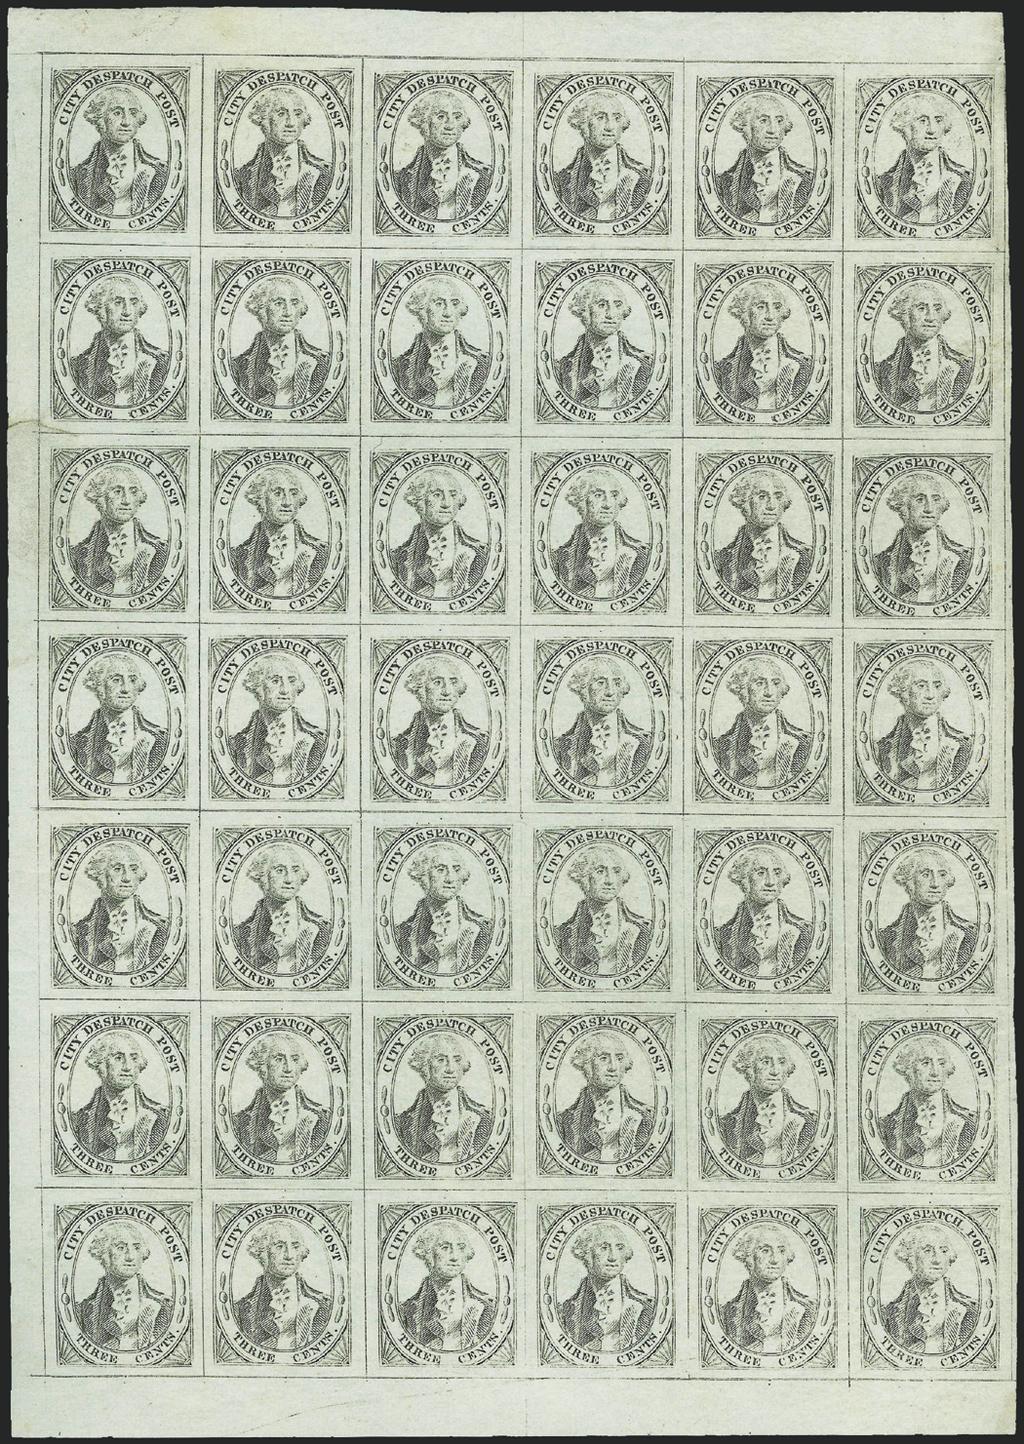 philately is believed to have produced such an unusual variety of stamps over such a long period. With an SCV of $27,500, and a presale estimate of $25,000-35,000, this rarity sold for $23,000.